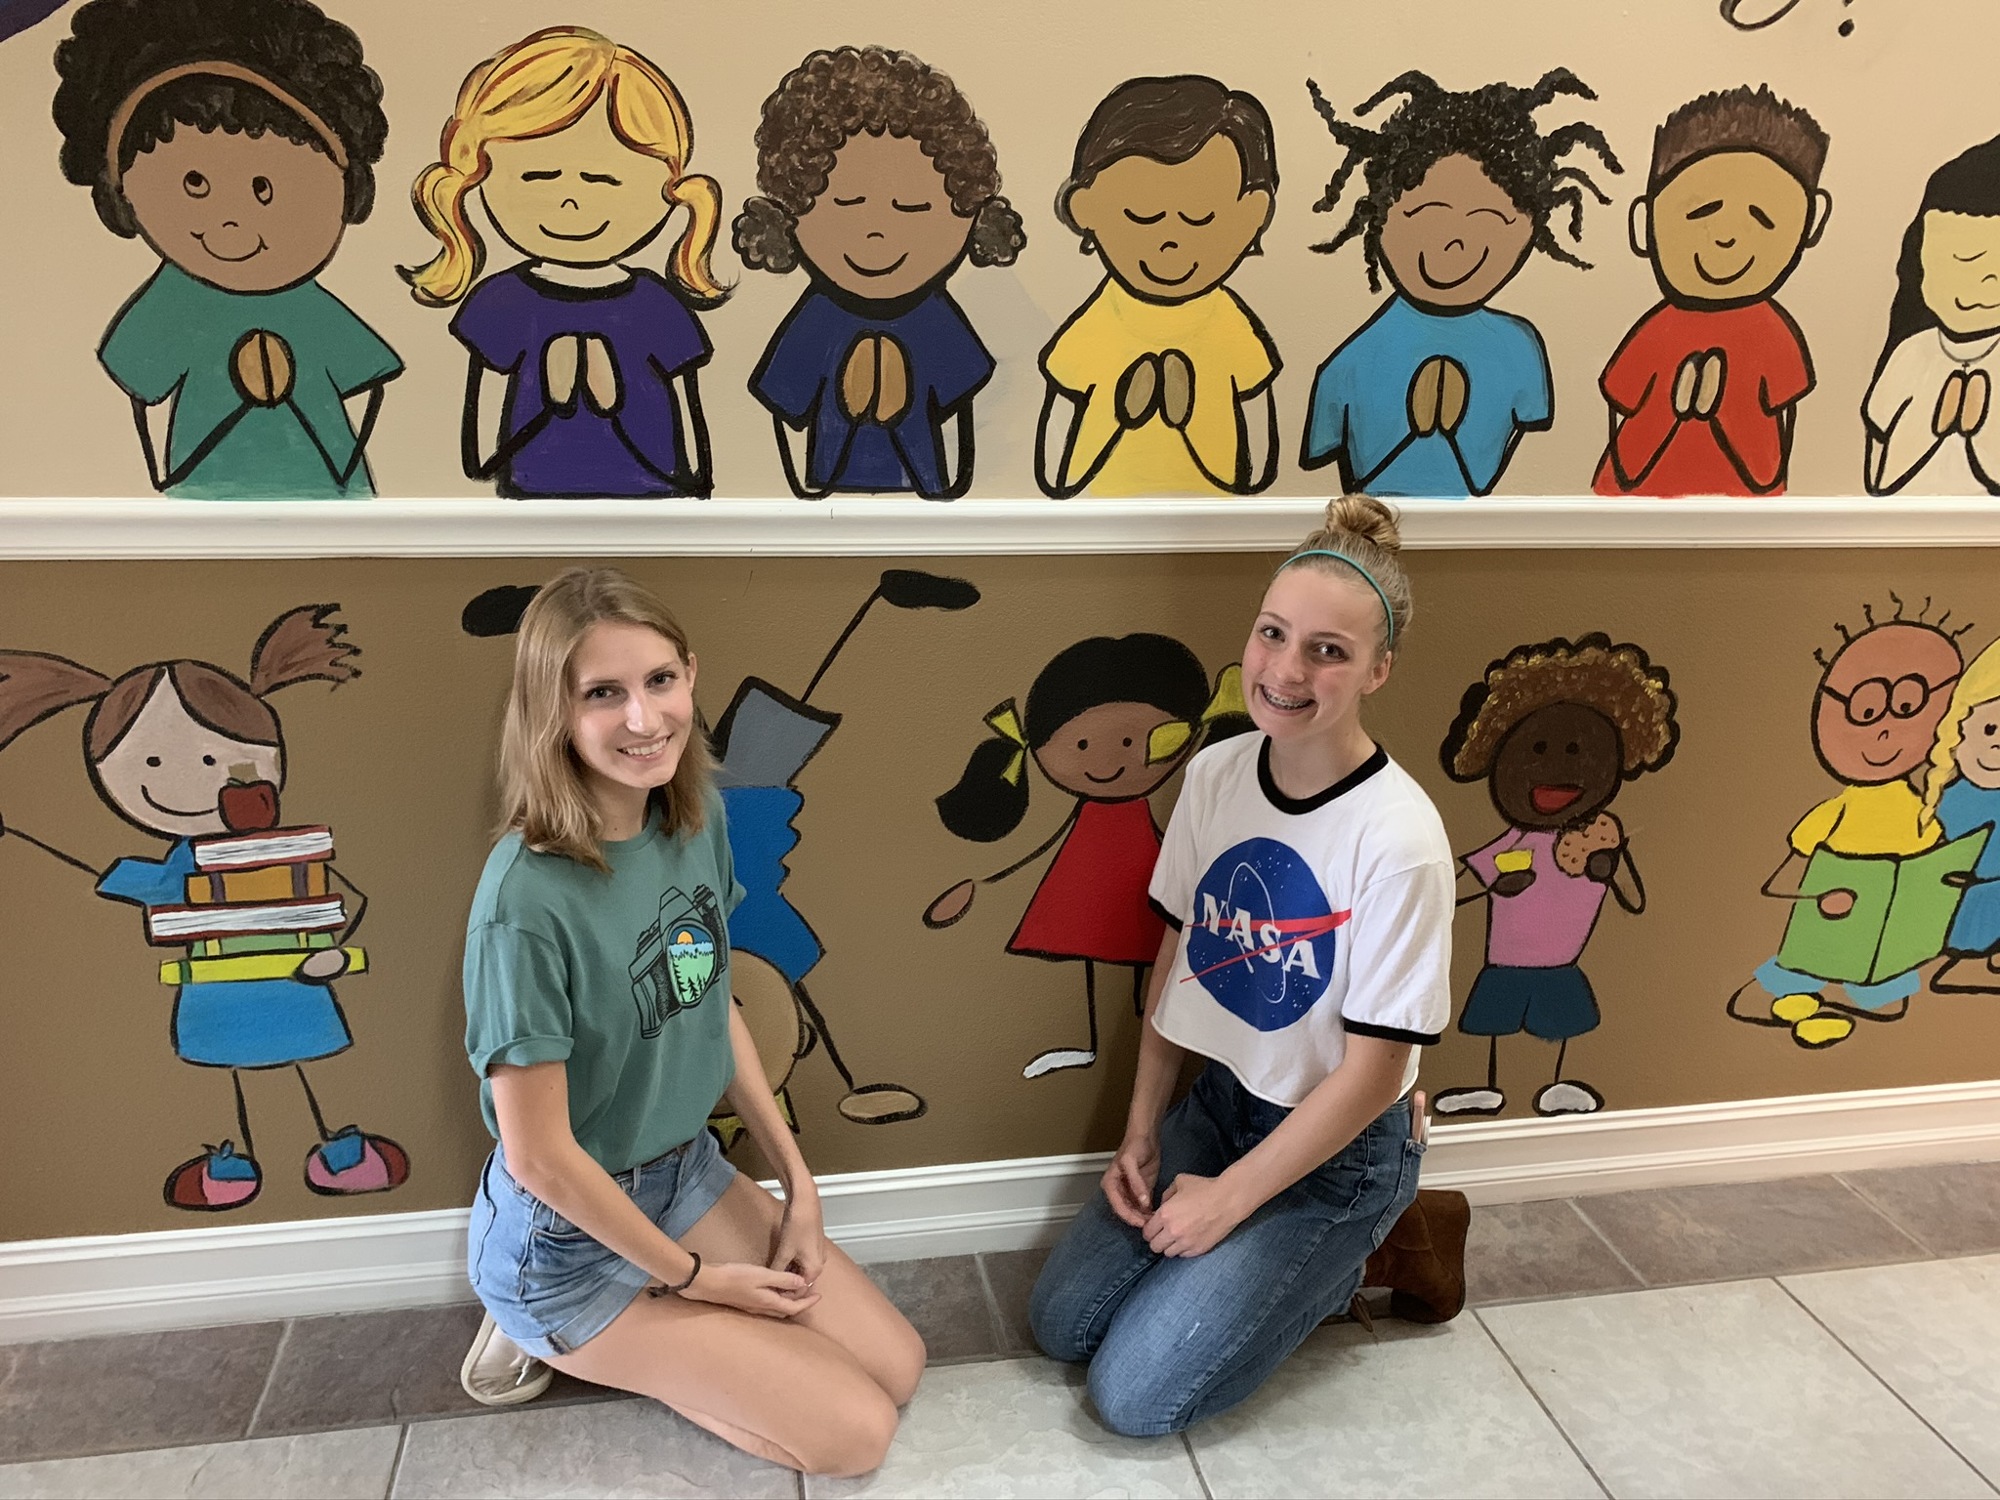 Girls representing the group Girl Spirit donated their time recently to help paint murals and other works of art at All Kidz Preschool.  (Courtesy Lana Wilkens-Gies)